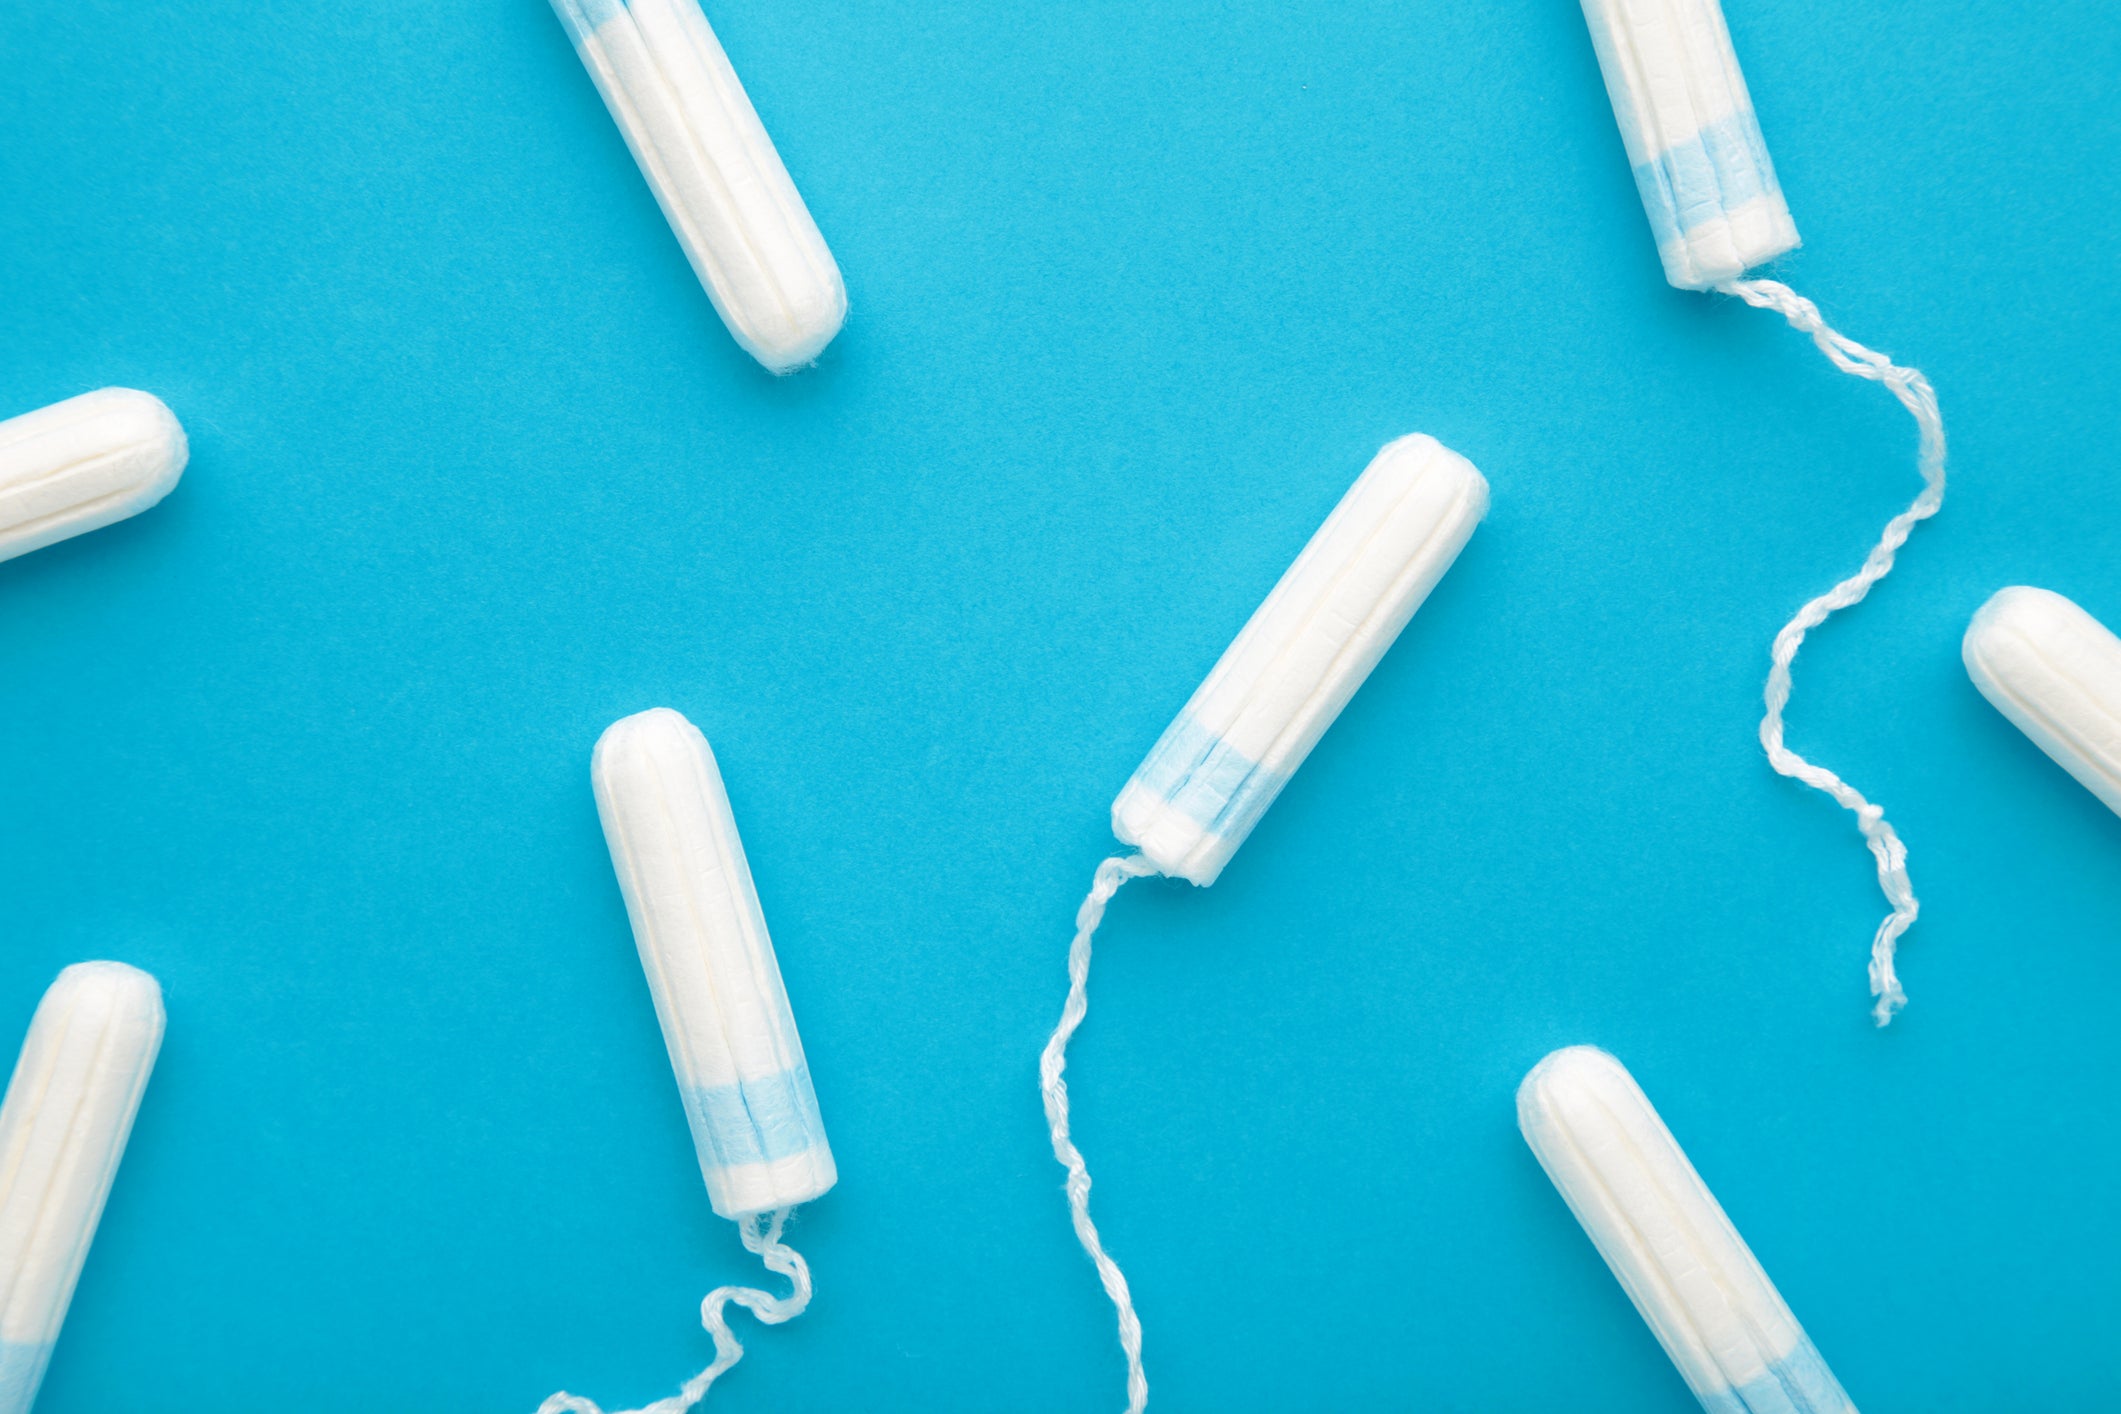 Researchers discovered that some 8 per cent of those who struggled to afford period products had reused throwaway one-use pads